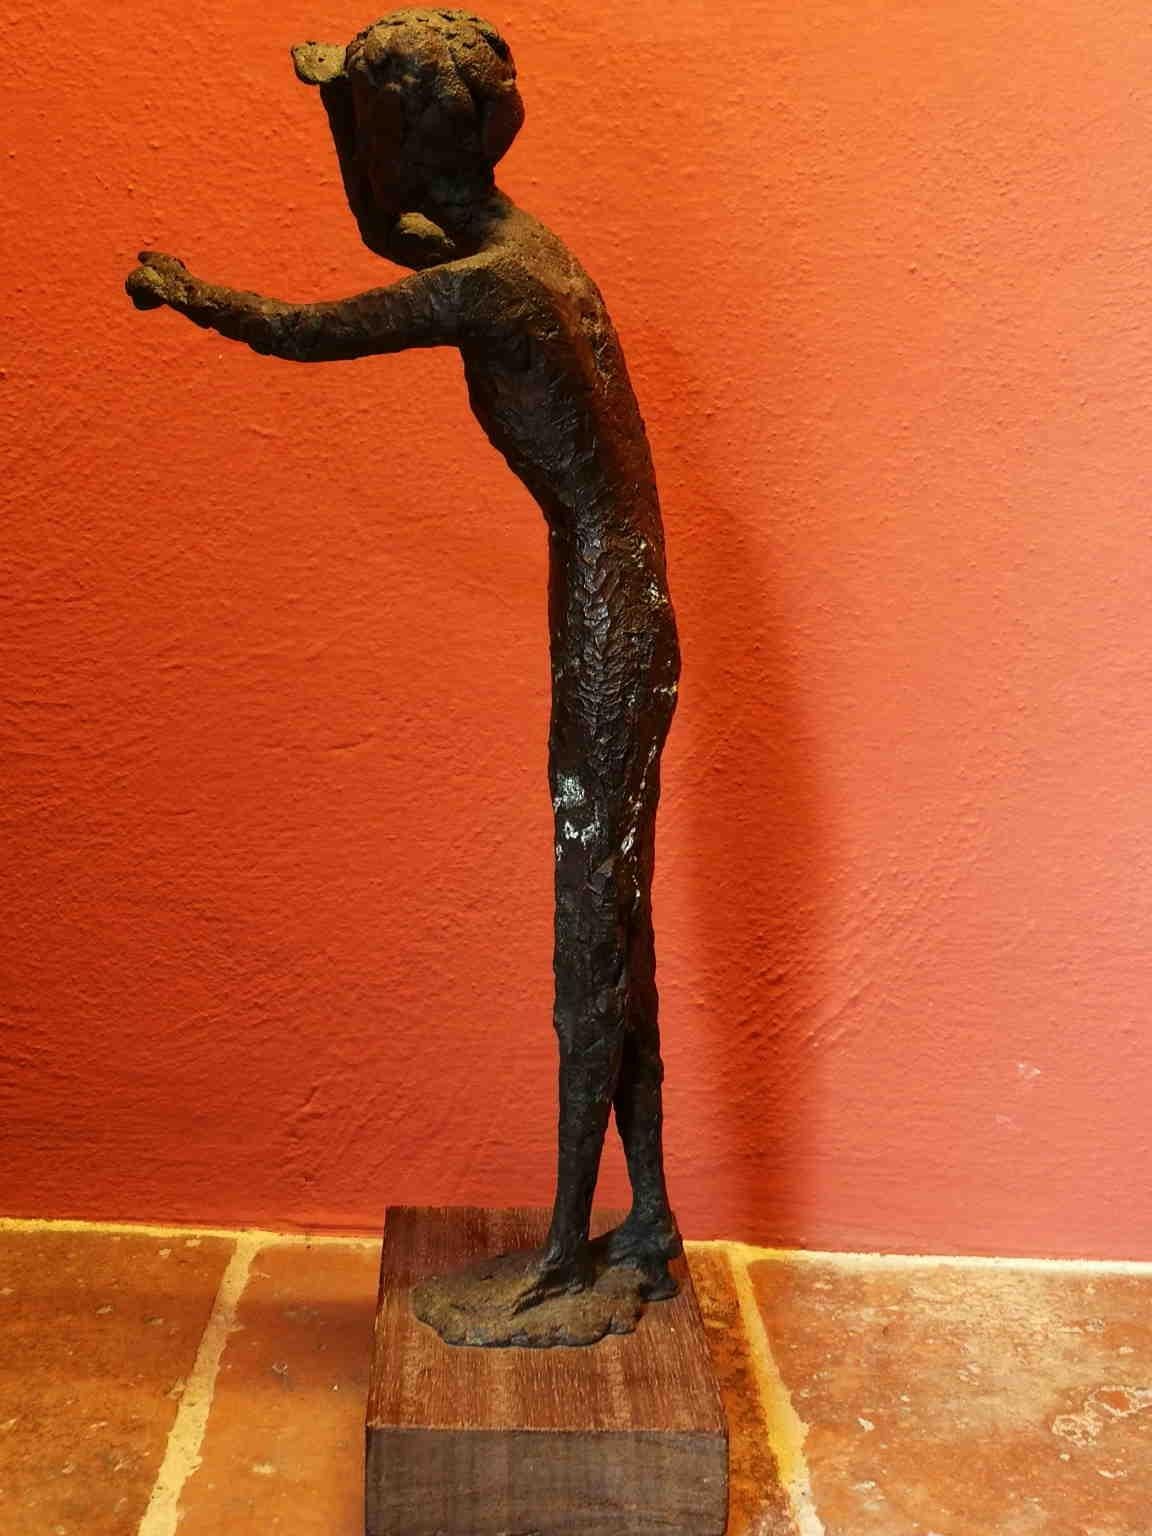 Tuscan Florentine Figurative Abstract Female Bronze Statue 20th century  For Sale 2